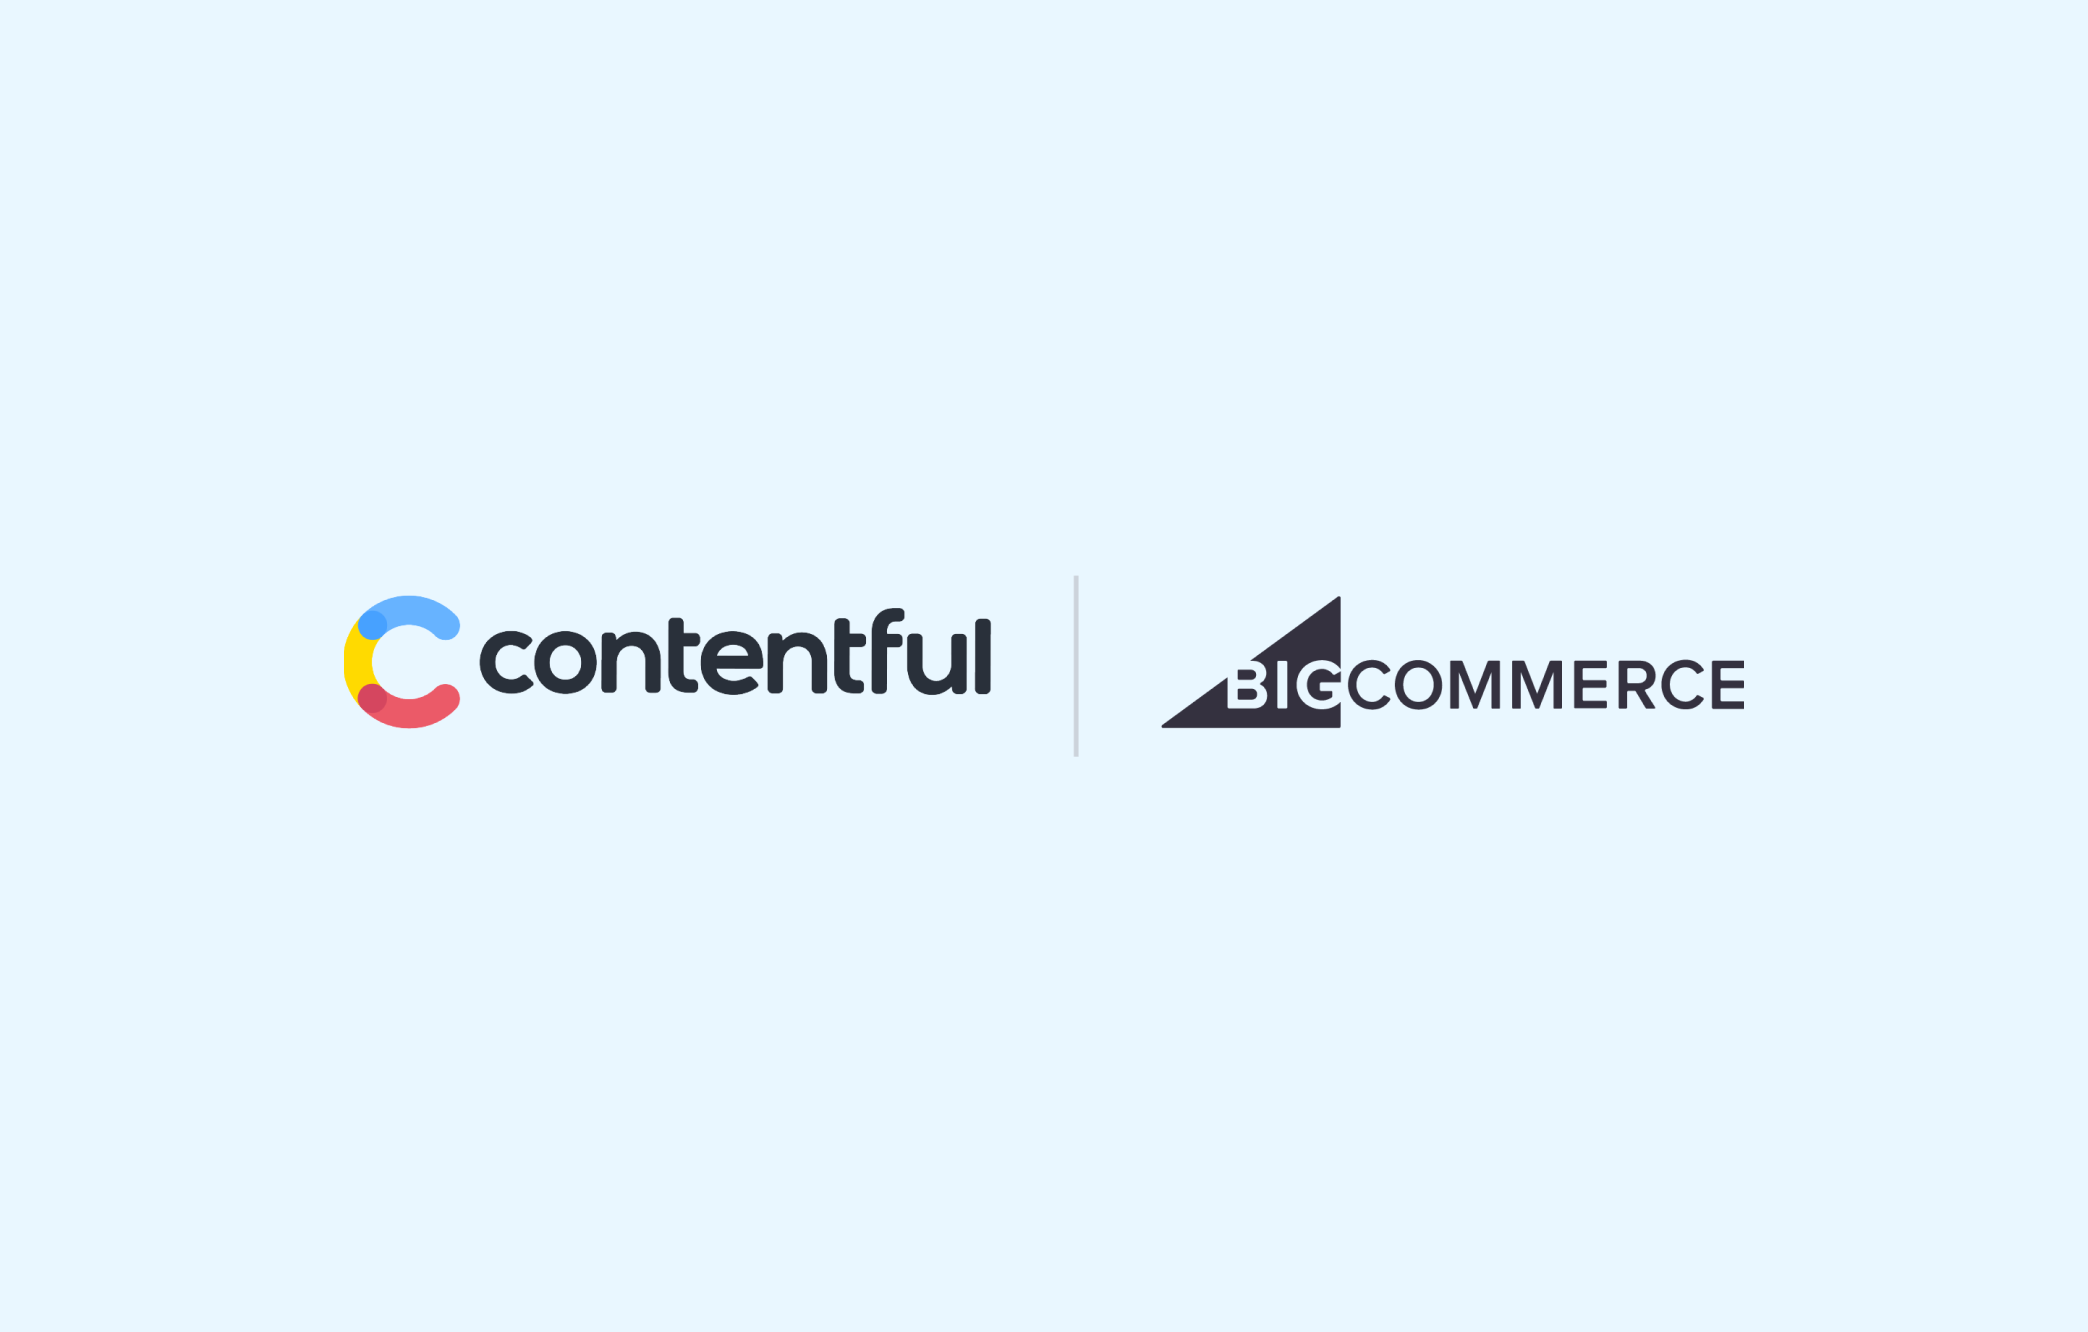 Logo lock of Contentful and BigCommerce logos